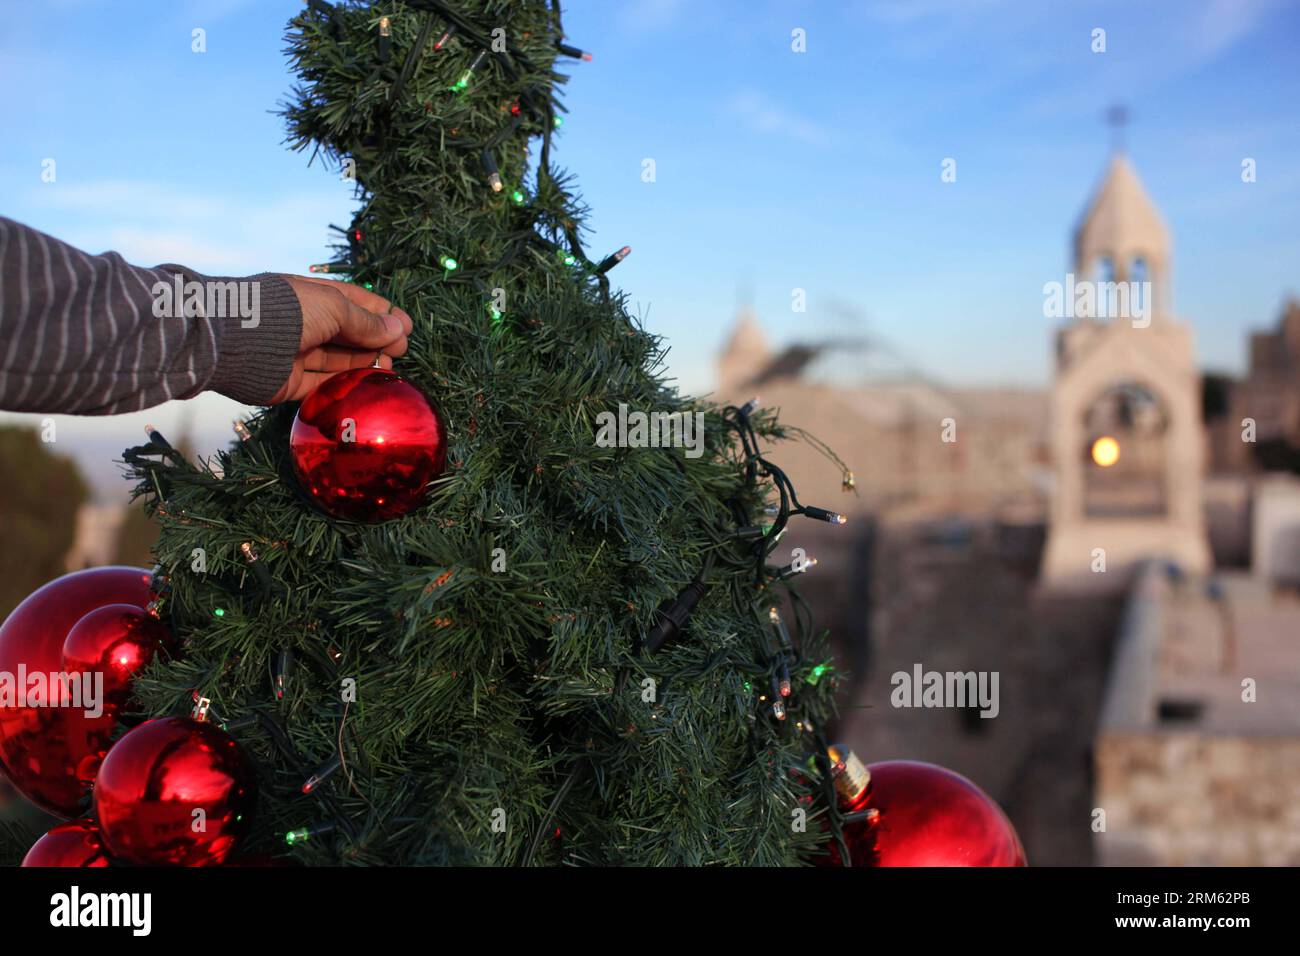 Bildnummer: 60775425  Datum: 30.11.2013  Copyright: imago/Xinhua     A worker puts final touches on a huge Christmas tree erected near the Church of the Nativity in the West Bank city of Bethlehem on Nov. 30, 2013. (Xinhua/Luay Sababa) MIDEAST-BETHLEHEM-CHRISTMAS TREE PUBLICATIONxNOTxINxCHN xcb x0x 2013 quer Stock Photo